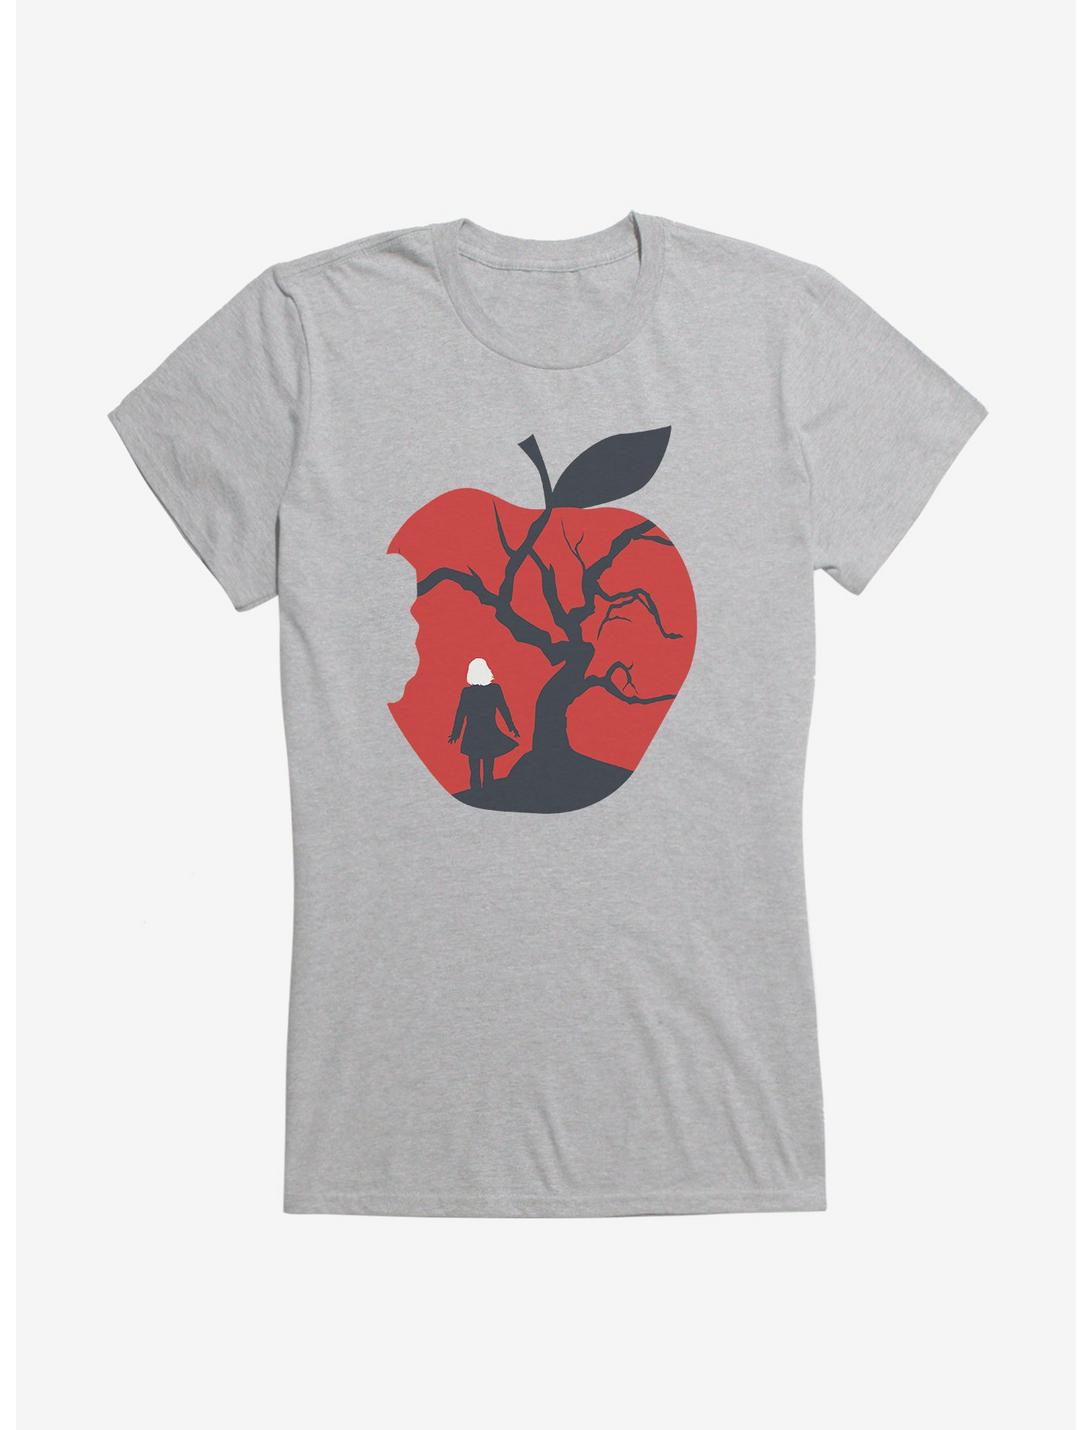 Chilling Adventures Of Sabrina Apple Tree Icon Girls T-Shirt, , hi-res